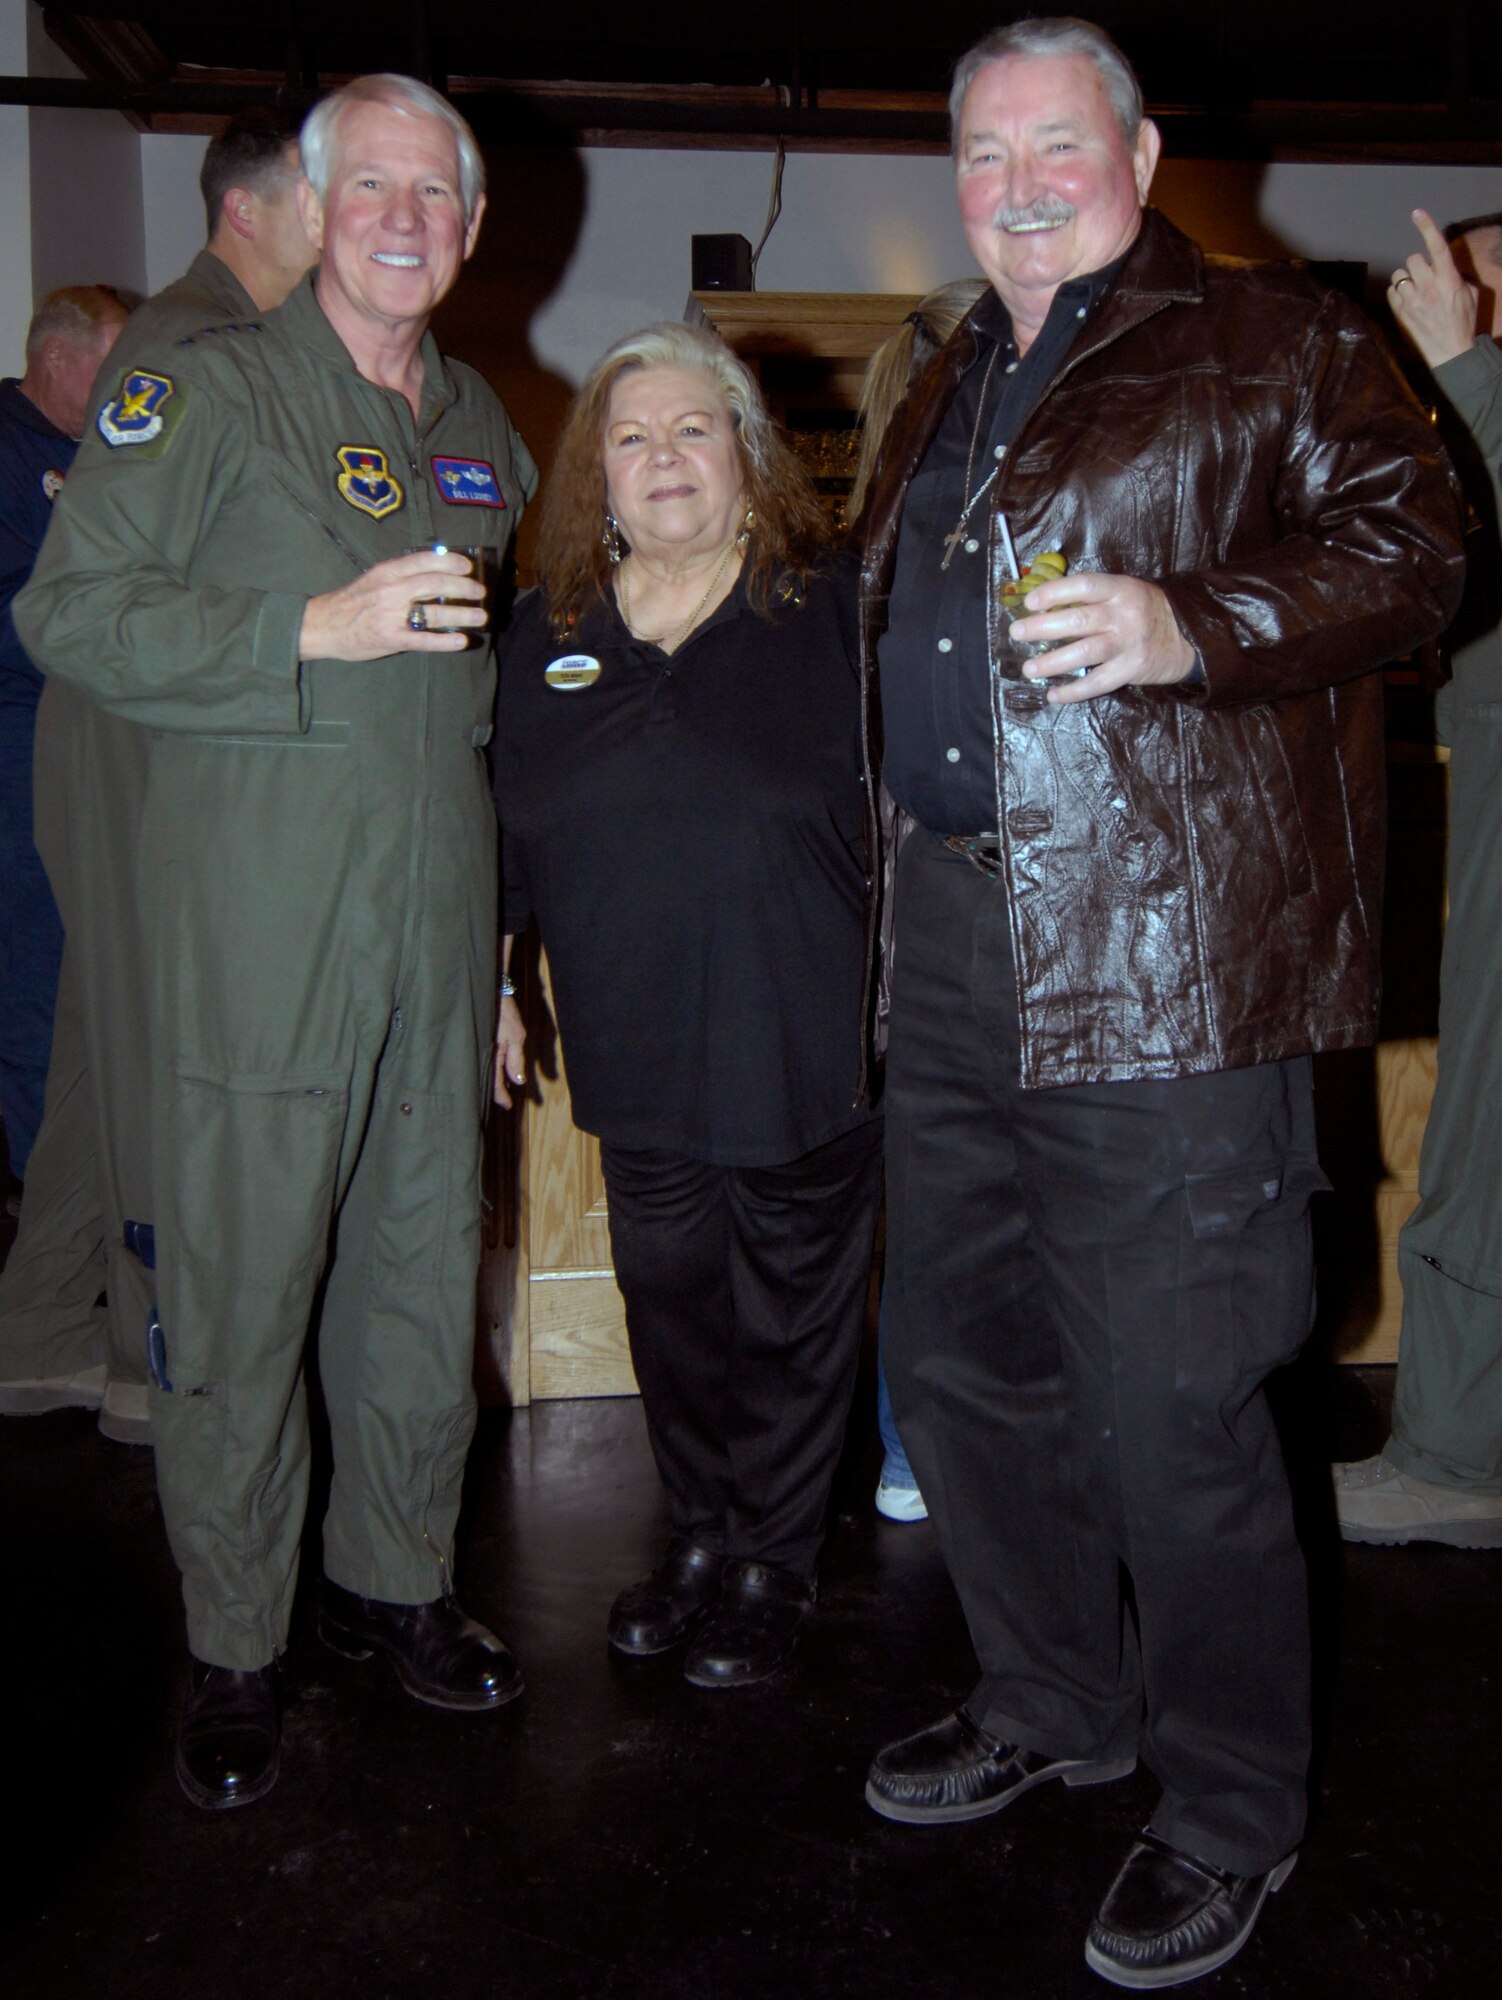 LAUGHLIN AIR FORCE BASE, Texas — Retired Gen. William Looney and retired Maj. Gen. Gerald Prather pose with Yolanda “YoYo” Meaze, a bartender at Club XL. General Looney performed the ribbon cutting ceremony for Club XL’s bar grand reopening Feb. 4. (U.S. Air Force photo by Jose Mendoza)